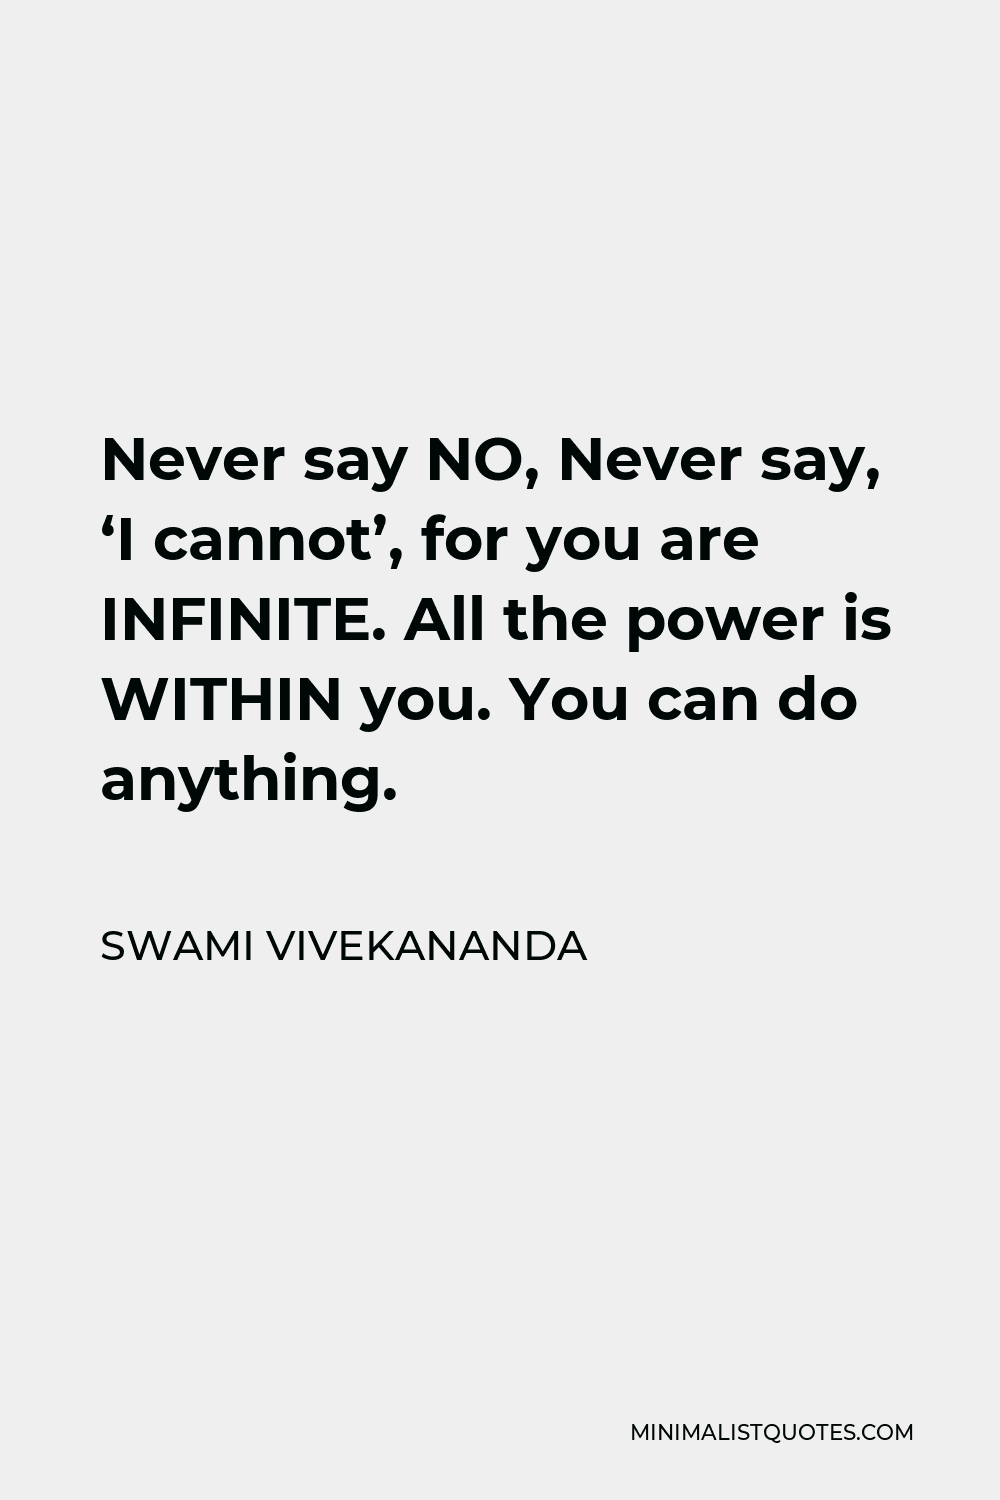 Swami Vivekananda Quote - Never say NO, Never say, ‘I cannot’, for you are INFINITE. All the power is WITHIN you. You can do anything.